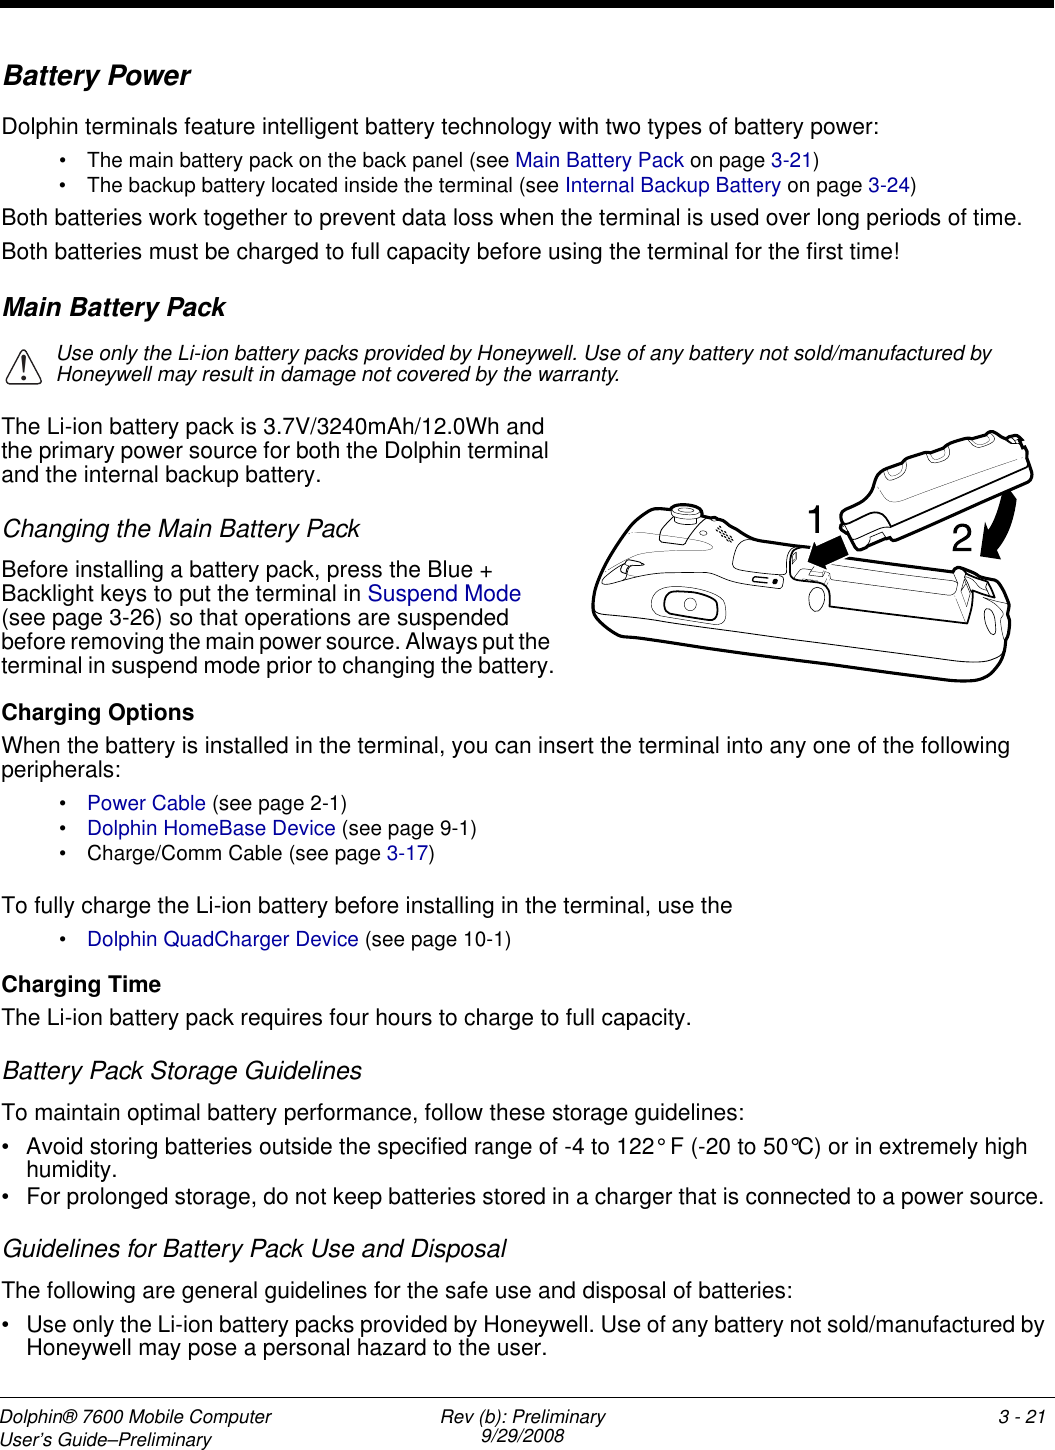 Dolphin® 7600 Mobile Computer User’s Guide–Preliminary Rev (b): Preliminary9/29/2008 3 - 21Battery PowerDolphin terminals feature intelligent battery technology with two types of battery power: • The main battery pack on the back panel (see Main Battery Pack on page 3-21)• The backup battery located inside the terminal (see Internal Backup Battery on page 3-24)Both batteries work together to prevent data loss when the terminal is used over long periods of time. Both batteries must be charged to full capacity before using the terminal for the first time! Main Battery PackUse only the Li-ion battery packs provided by Honeywell. Use of any battery not sold/manufactured by Honeywell may result in damage not covered by the warranty.The Li-ion battery pack is 3.7V/3240mAh/12.0Wh and the primary power source for both the Dolphin terminal and the internal backup battery. Changing the Main Battery PackBefore installing a battery pack, press the Blue + Backlight keys to put the terminal in Suspend Mode (see page 3-26) so that operations are suspended before removing the main power source. Always put the terminal in suspend mode prior to changing the battery.Charging OptionsWhen the battery is installed in the terminal, you can insert the terminal into any one of the following peripherals:•Power Cable (see page 2-1)•Dolphin HomeBase Device (see page 9-1)• Charge/Comm Cable (see page 3-17)To fully charge the Li-ion battery before installing in the terminal, use the •Dolphin QuadCharger Device (see page 10-1)Charging TimeThe Li-ion battery pack requires four hours to charge to full capacity.Battery Pack Storage GuidelinesTo maintain optimal battery performance, follow these storage guidelines:• Avoid storing batteries outside the specified range of -4 to 122° F (-20 to 50°C) or in extremely high humidity.• For prolonged storage, do not keep batteries stored in a charger that is connected to a power source. Guidelines for Battery Pack Use and DisposalThe following are general guidelines for the safe use and disposal of batteries:• Use only the Li-ion battery packs provided by Honeywell. Use of any battery not sold/manufactured by Honeywell may pose a personal hazard to the user.!